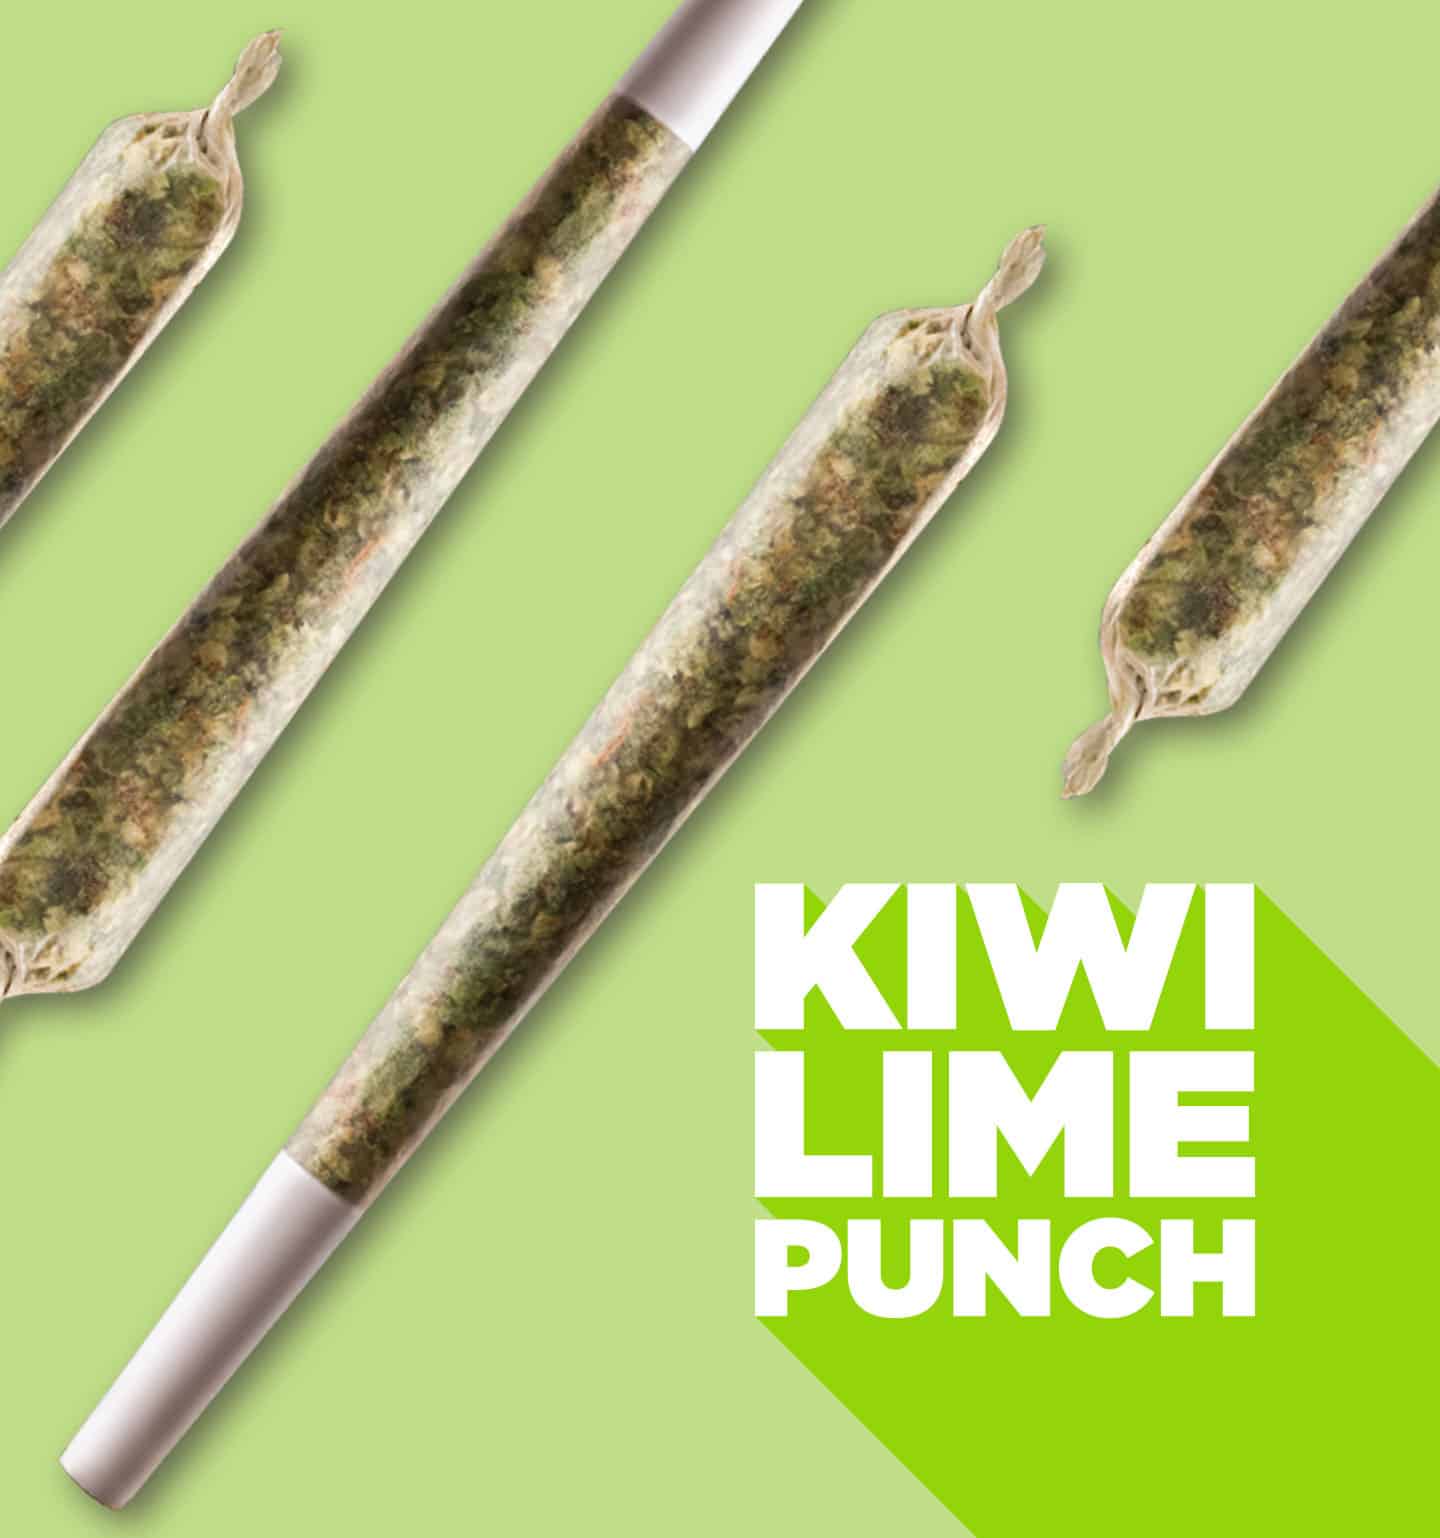 kiwi lime punch roll